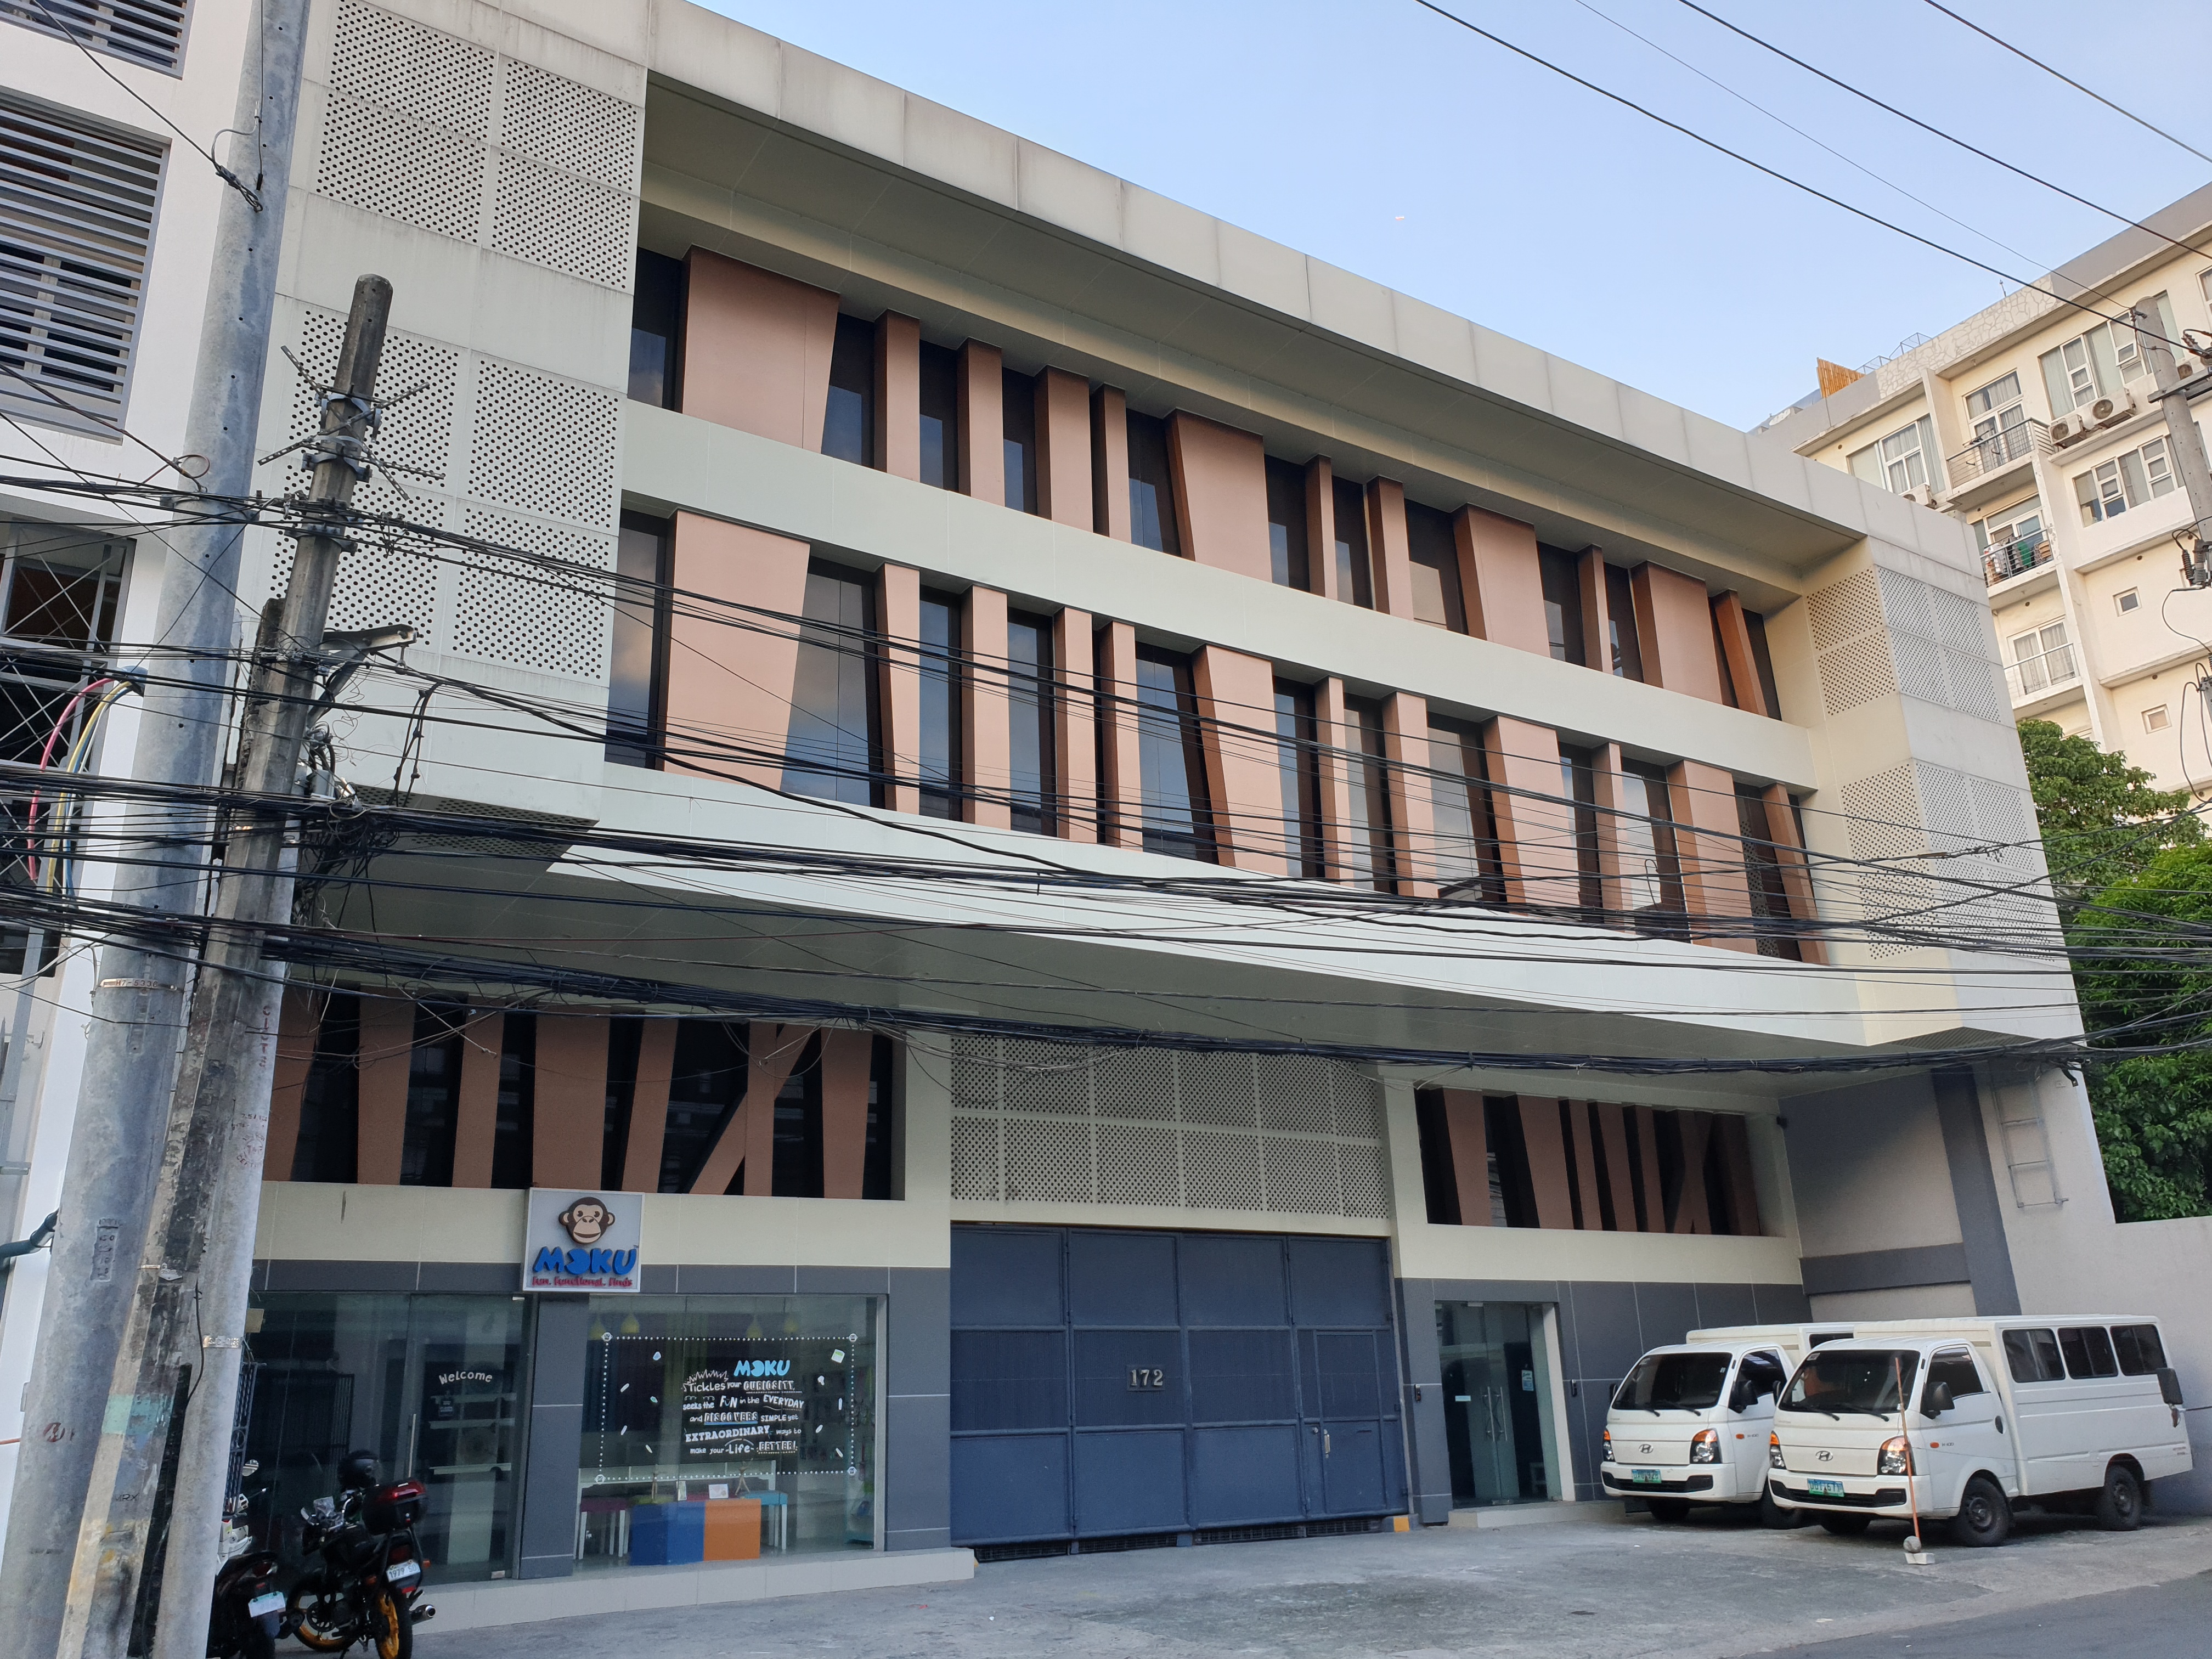 1,862.75 sqm Office Warehouse for Lease in Delta Center, San Juan City